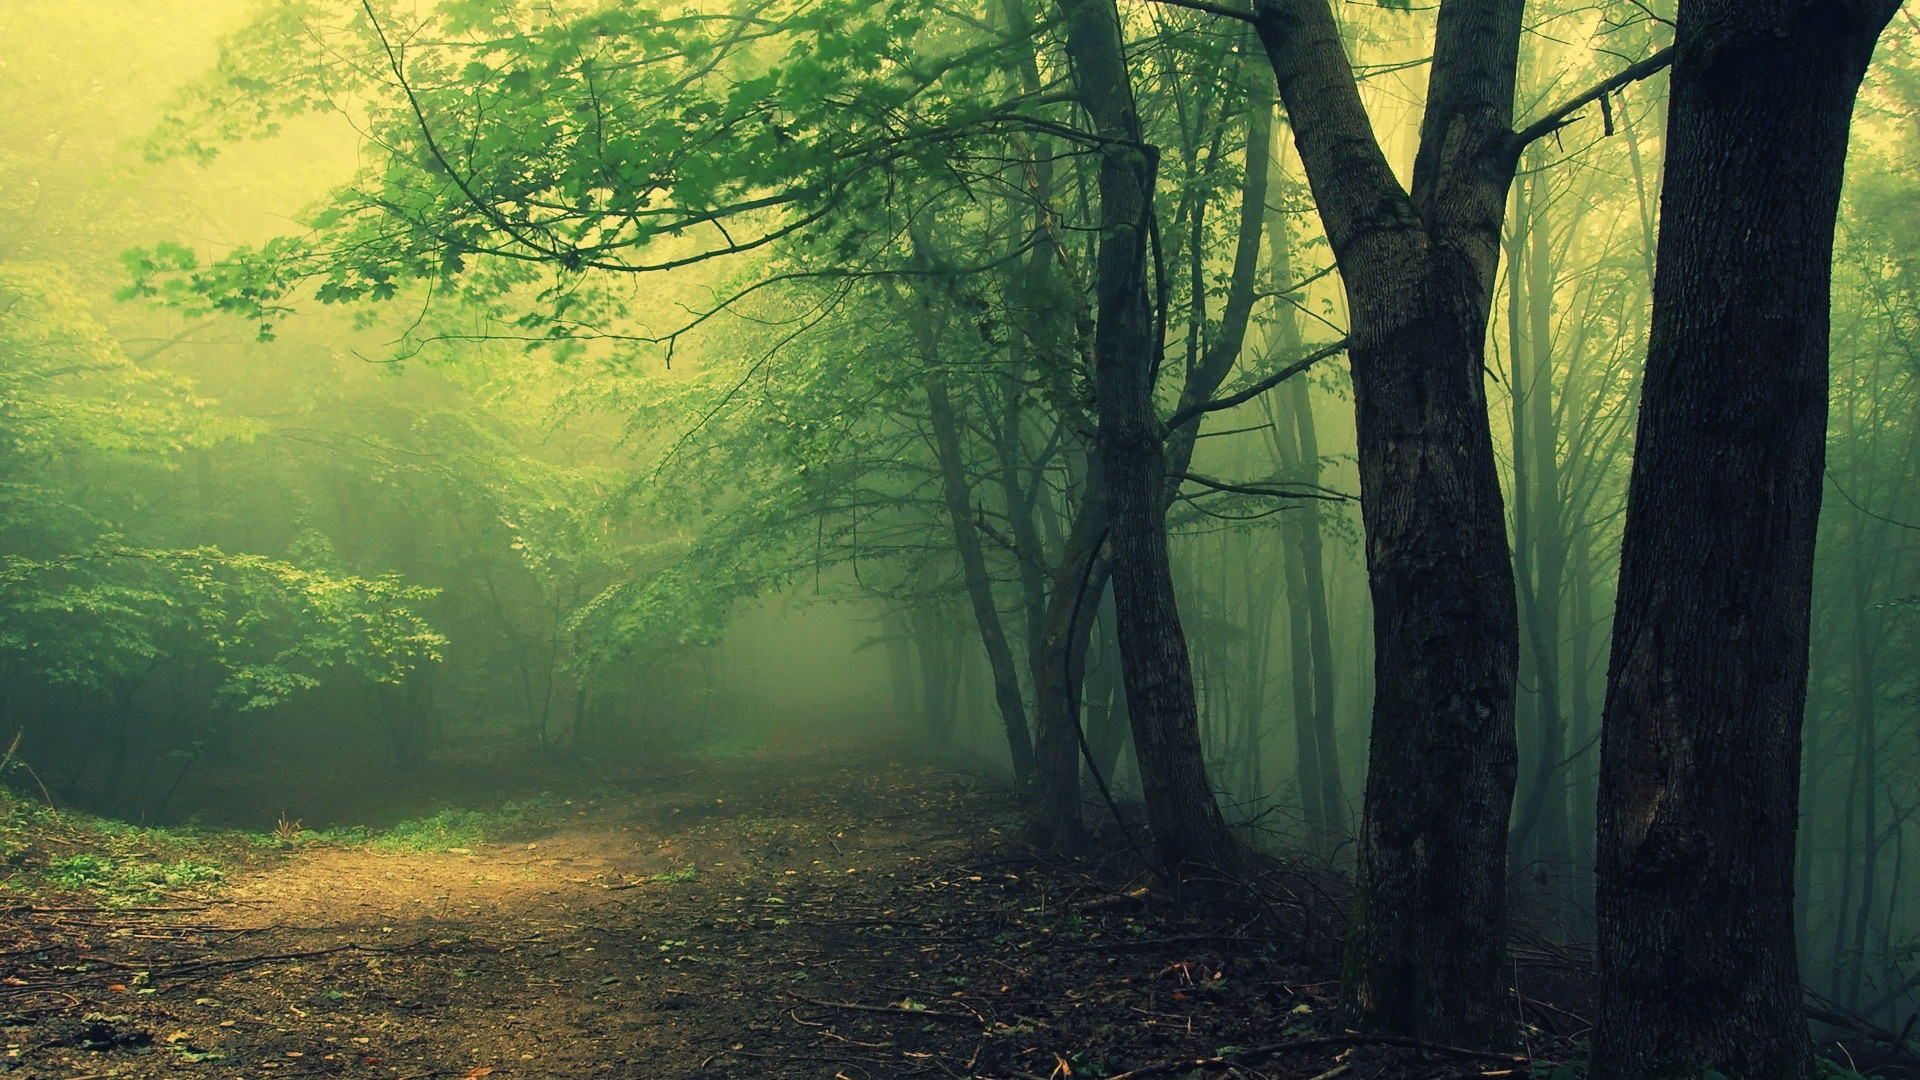 1920x1080 Hoia Baciu Forest in Romania. Said to be a haunted forest, also called "